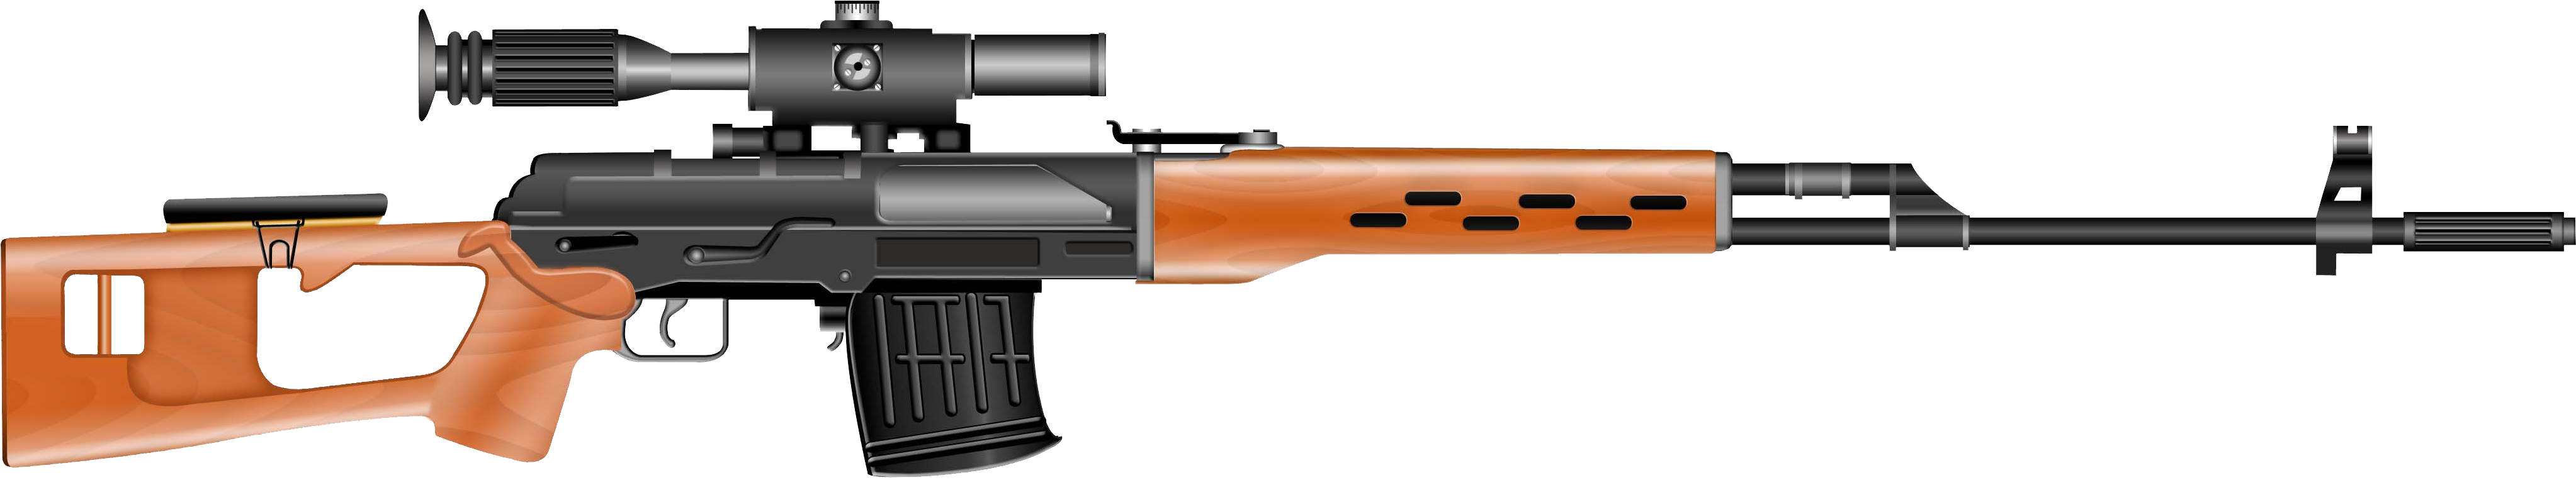 Sniper Rifle PNG Images HD